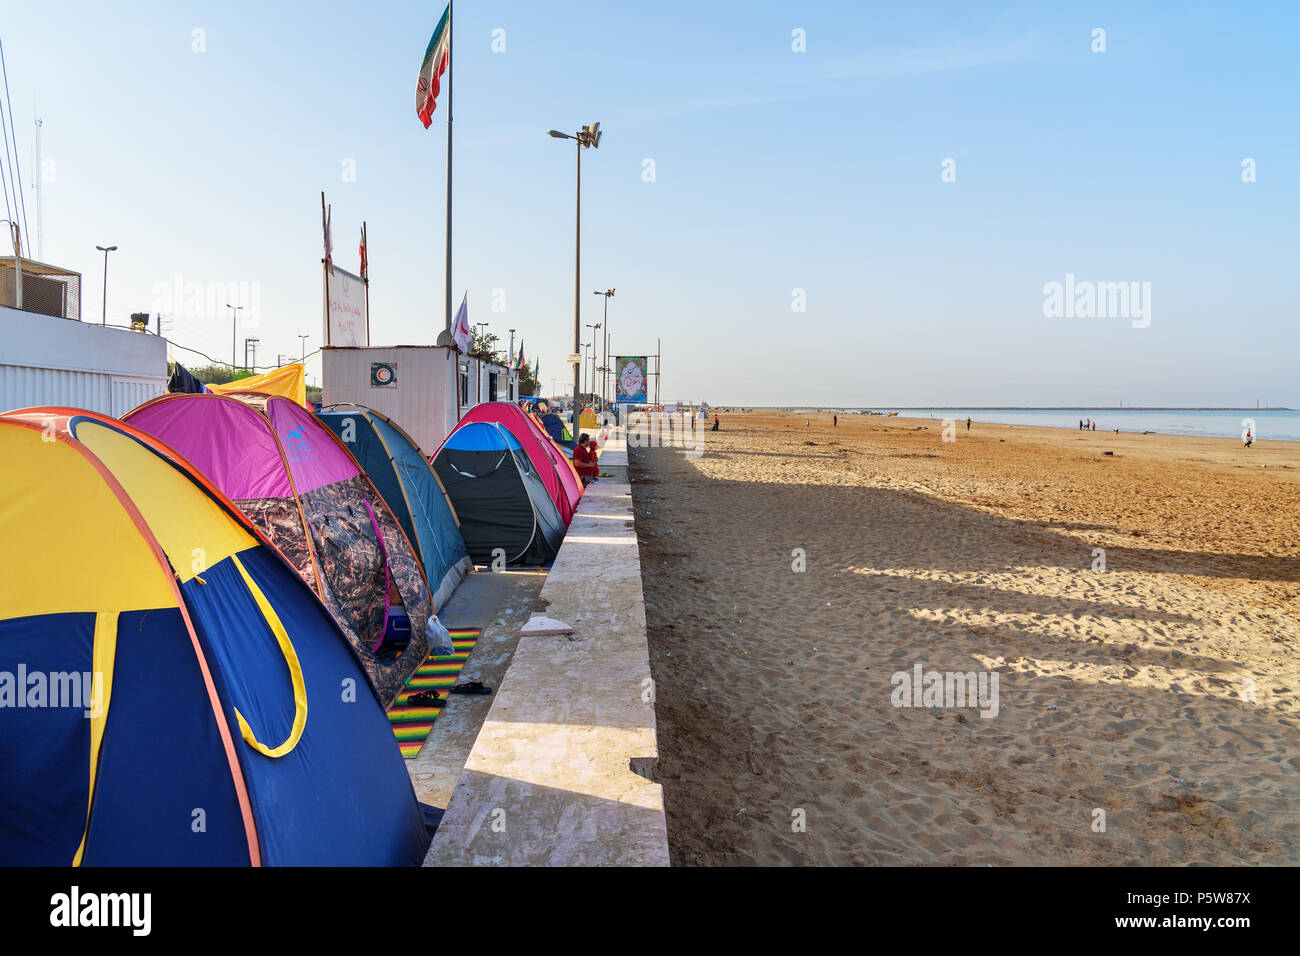 Bandar Ganaveh, Bushehr Province, Iran - March 27, 2018: Iranian travelers living in tents on the beach at Persian Gulf. A lot of Iranians traveling d Stock Photo